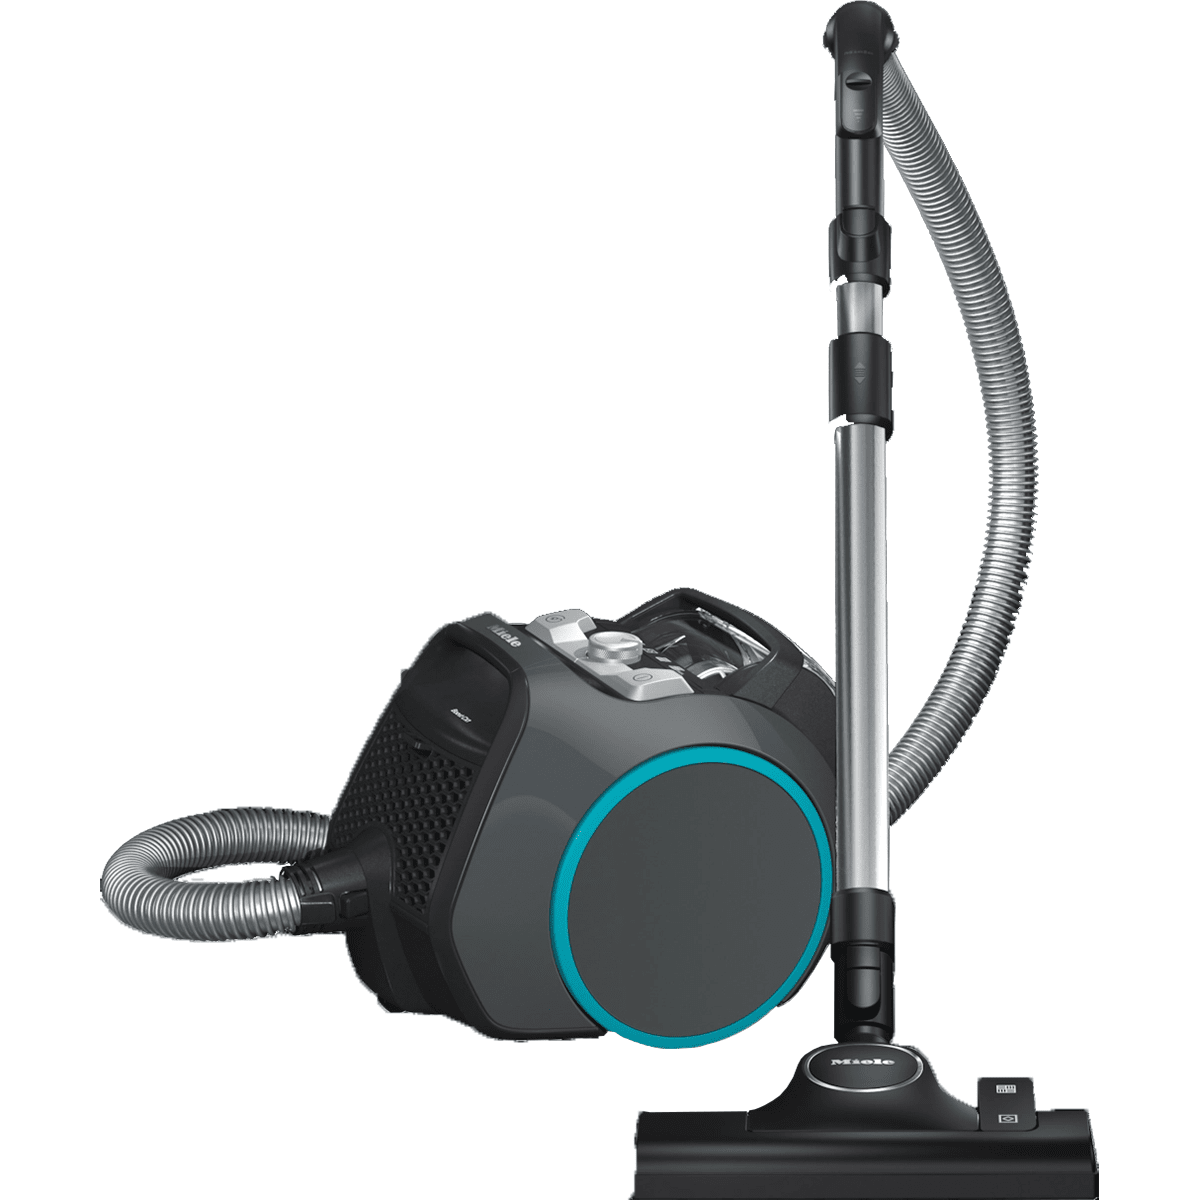 Miele CX1 Boost Bagless Canister Vacuum - Graphite Grey